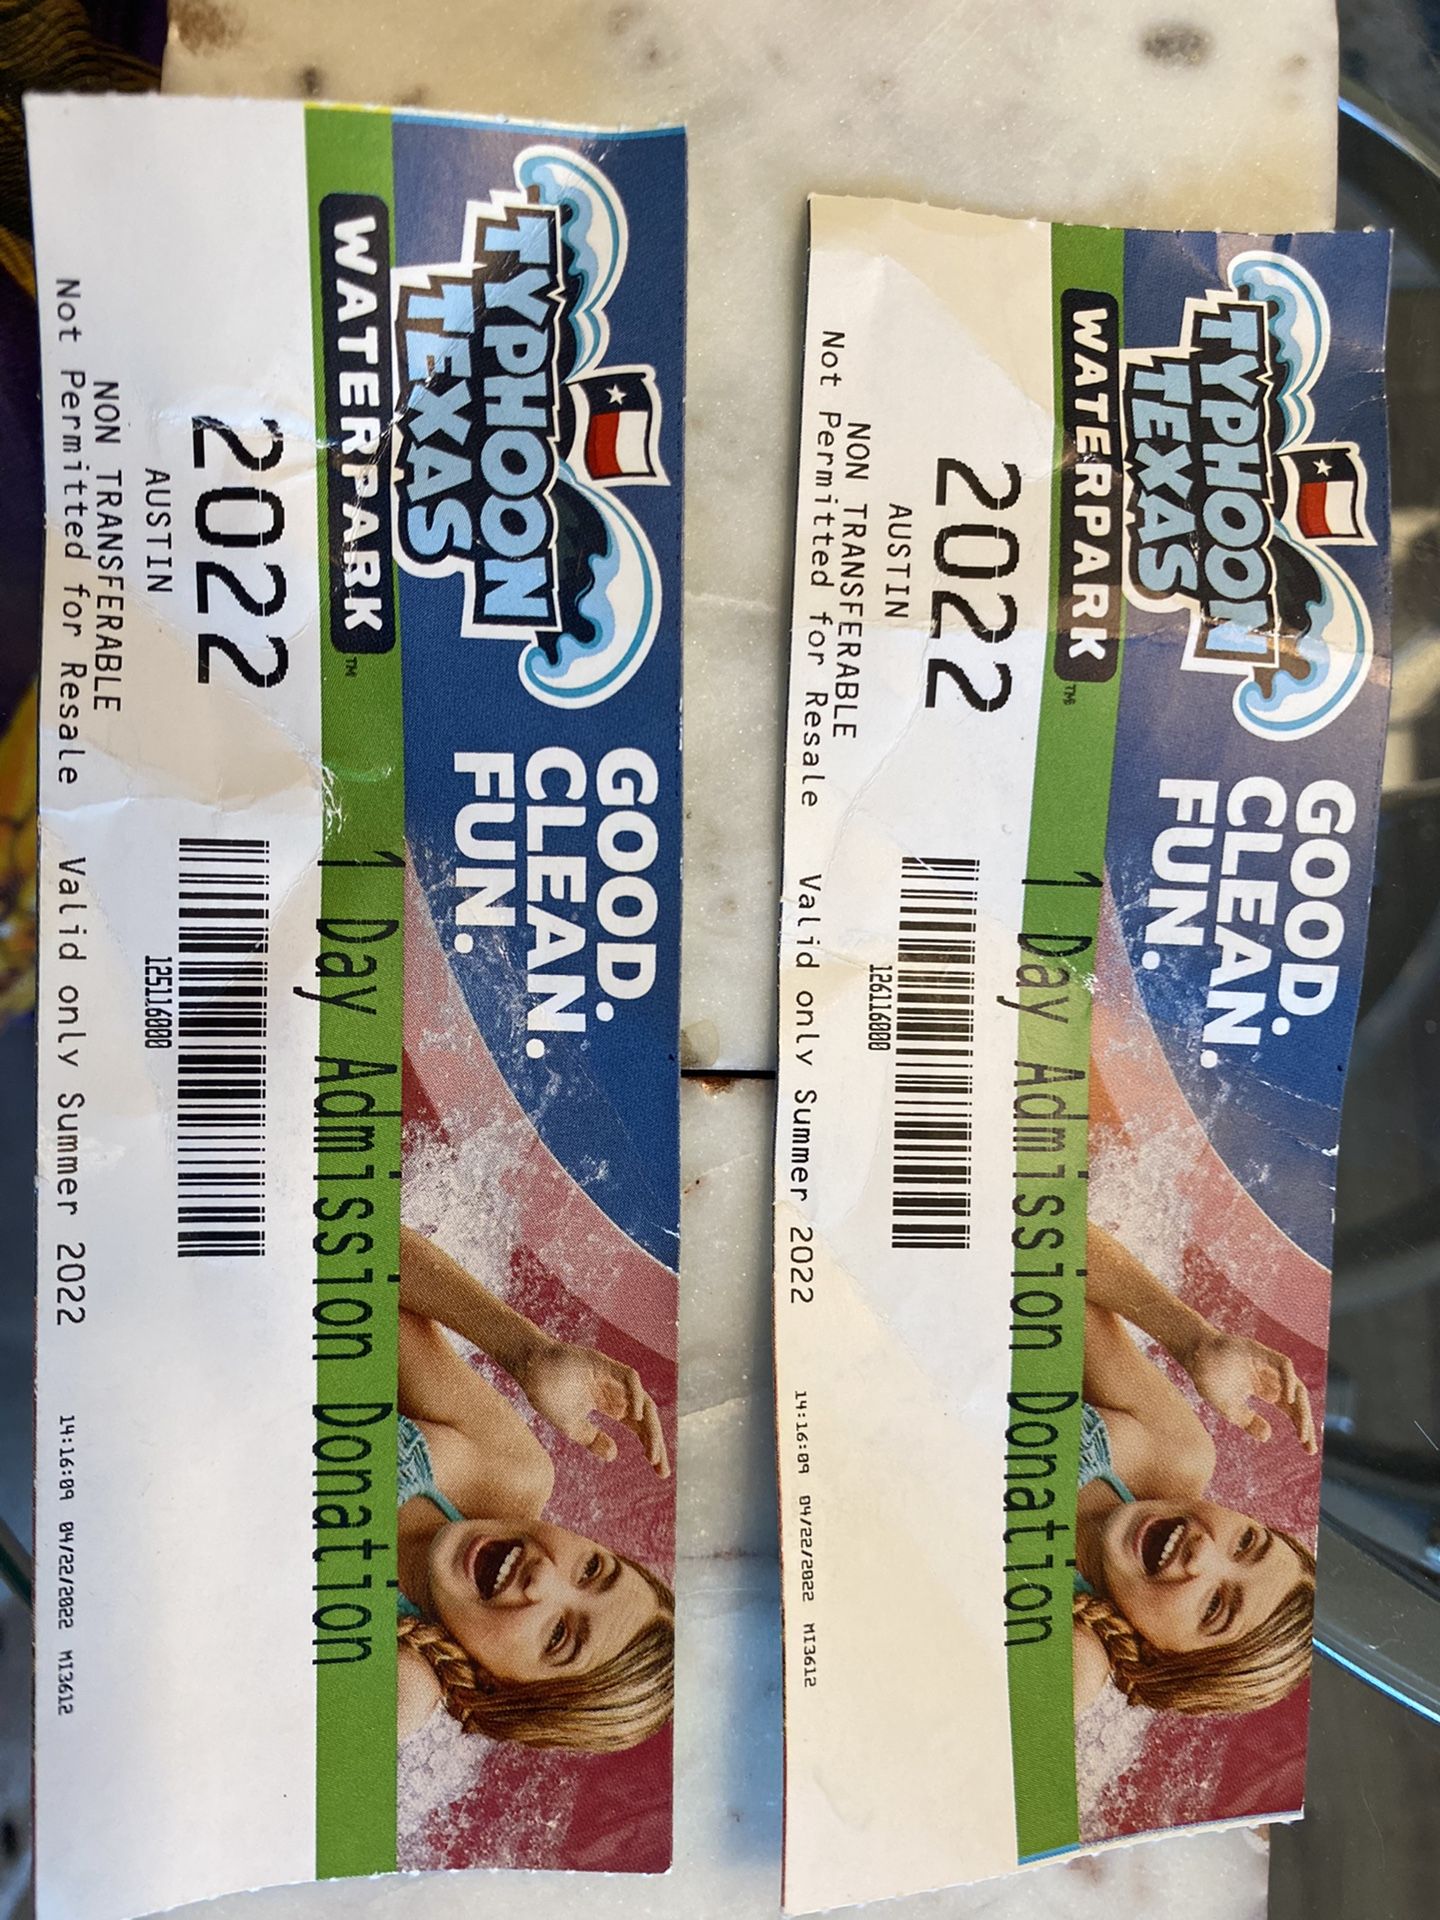 Pair of Adult 1 Day Admission Tickets To Typhoon Texas Waterpark In Pflugerville, Texas